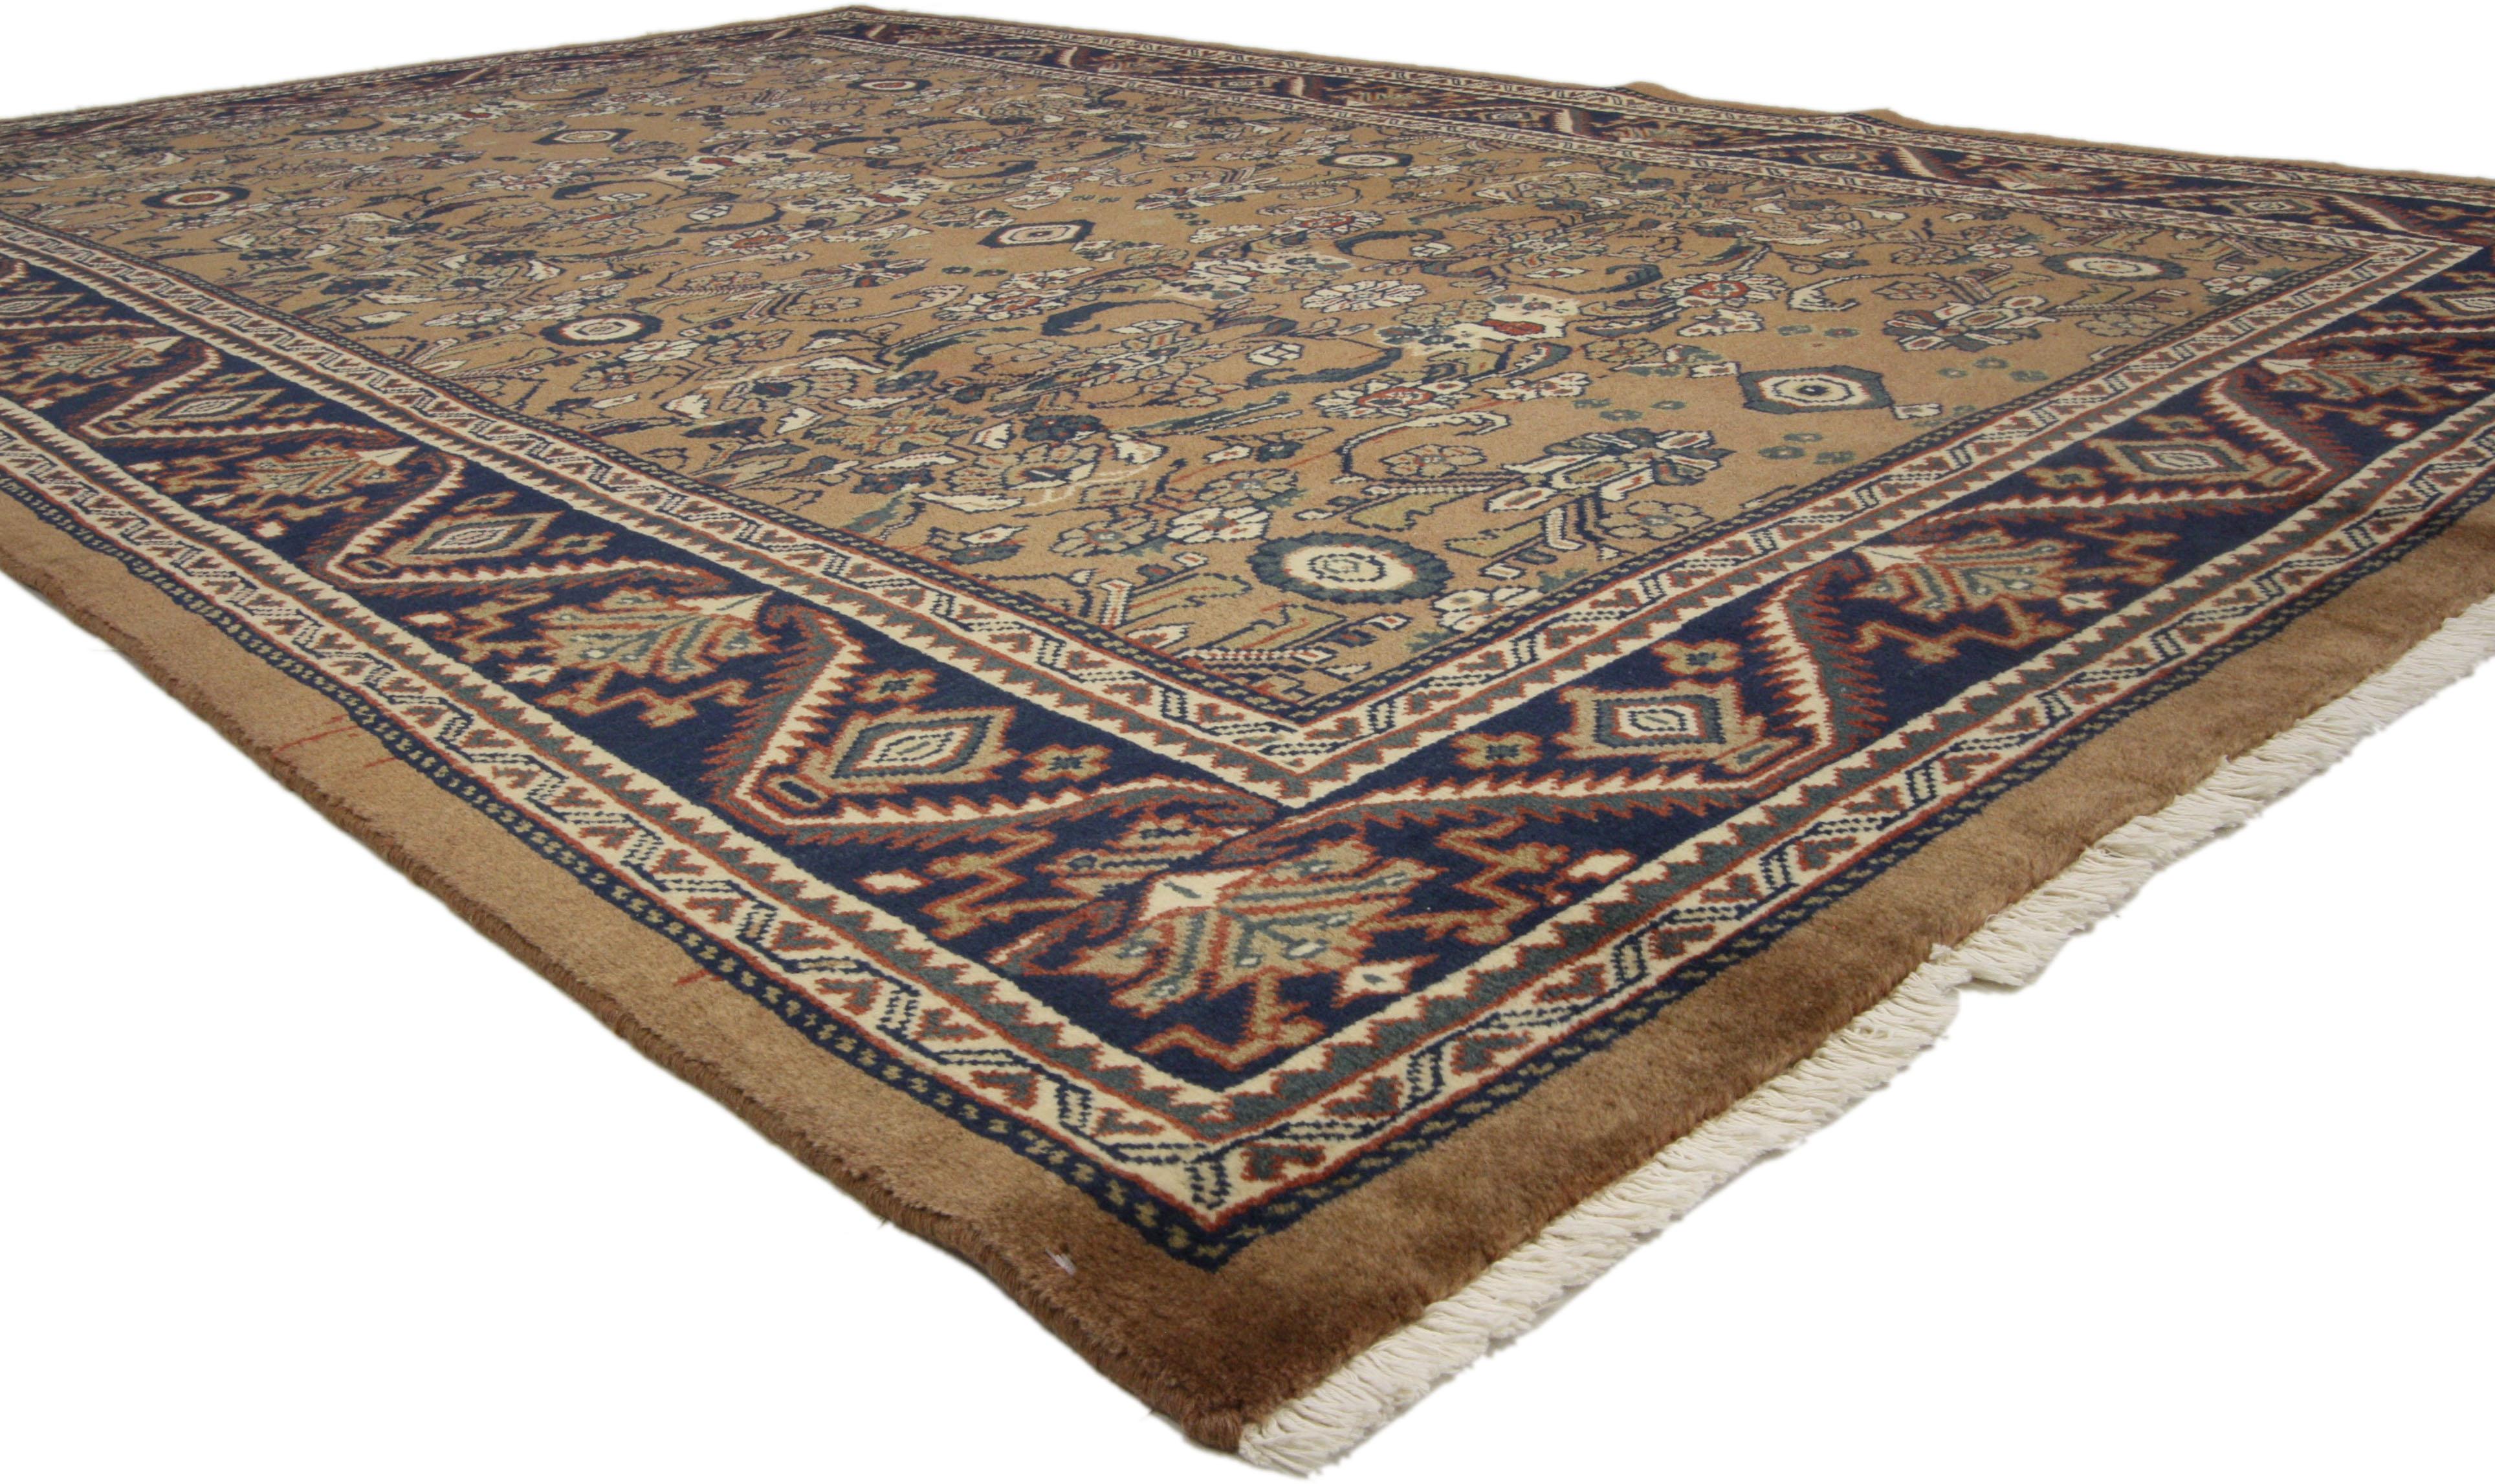 75834 Vintage Persian Mahal Rug, 06'08 x 10'02. Warm and inviting with timeless elegance, this hand-knotted wool vintage Persian Mahal rug is a captivating vision of woven beauty. The large-scale Mina Khani design earthy colorway woven into this